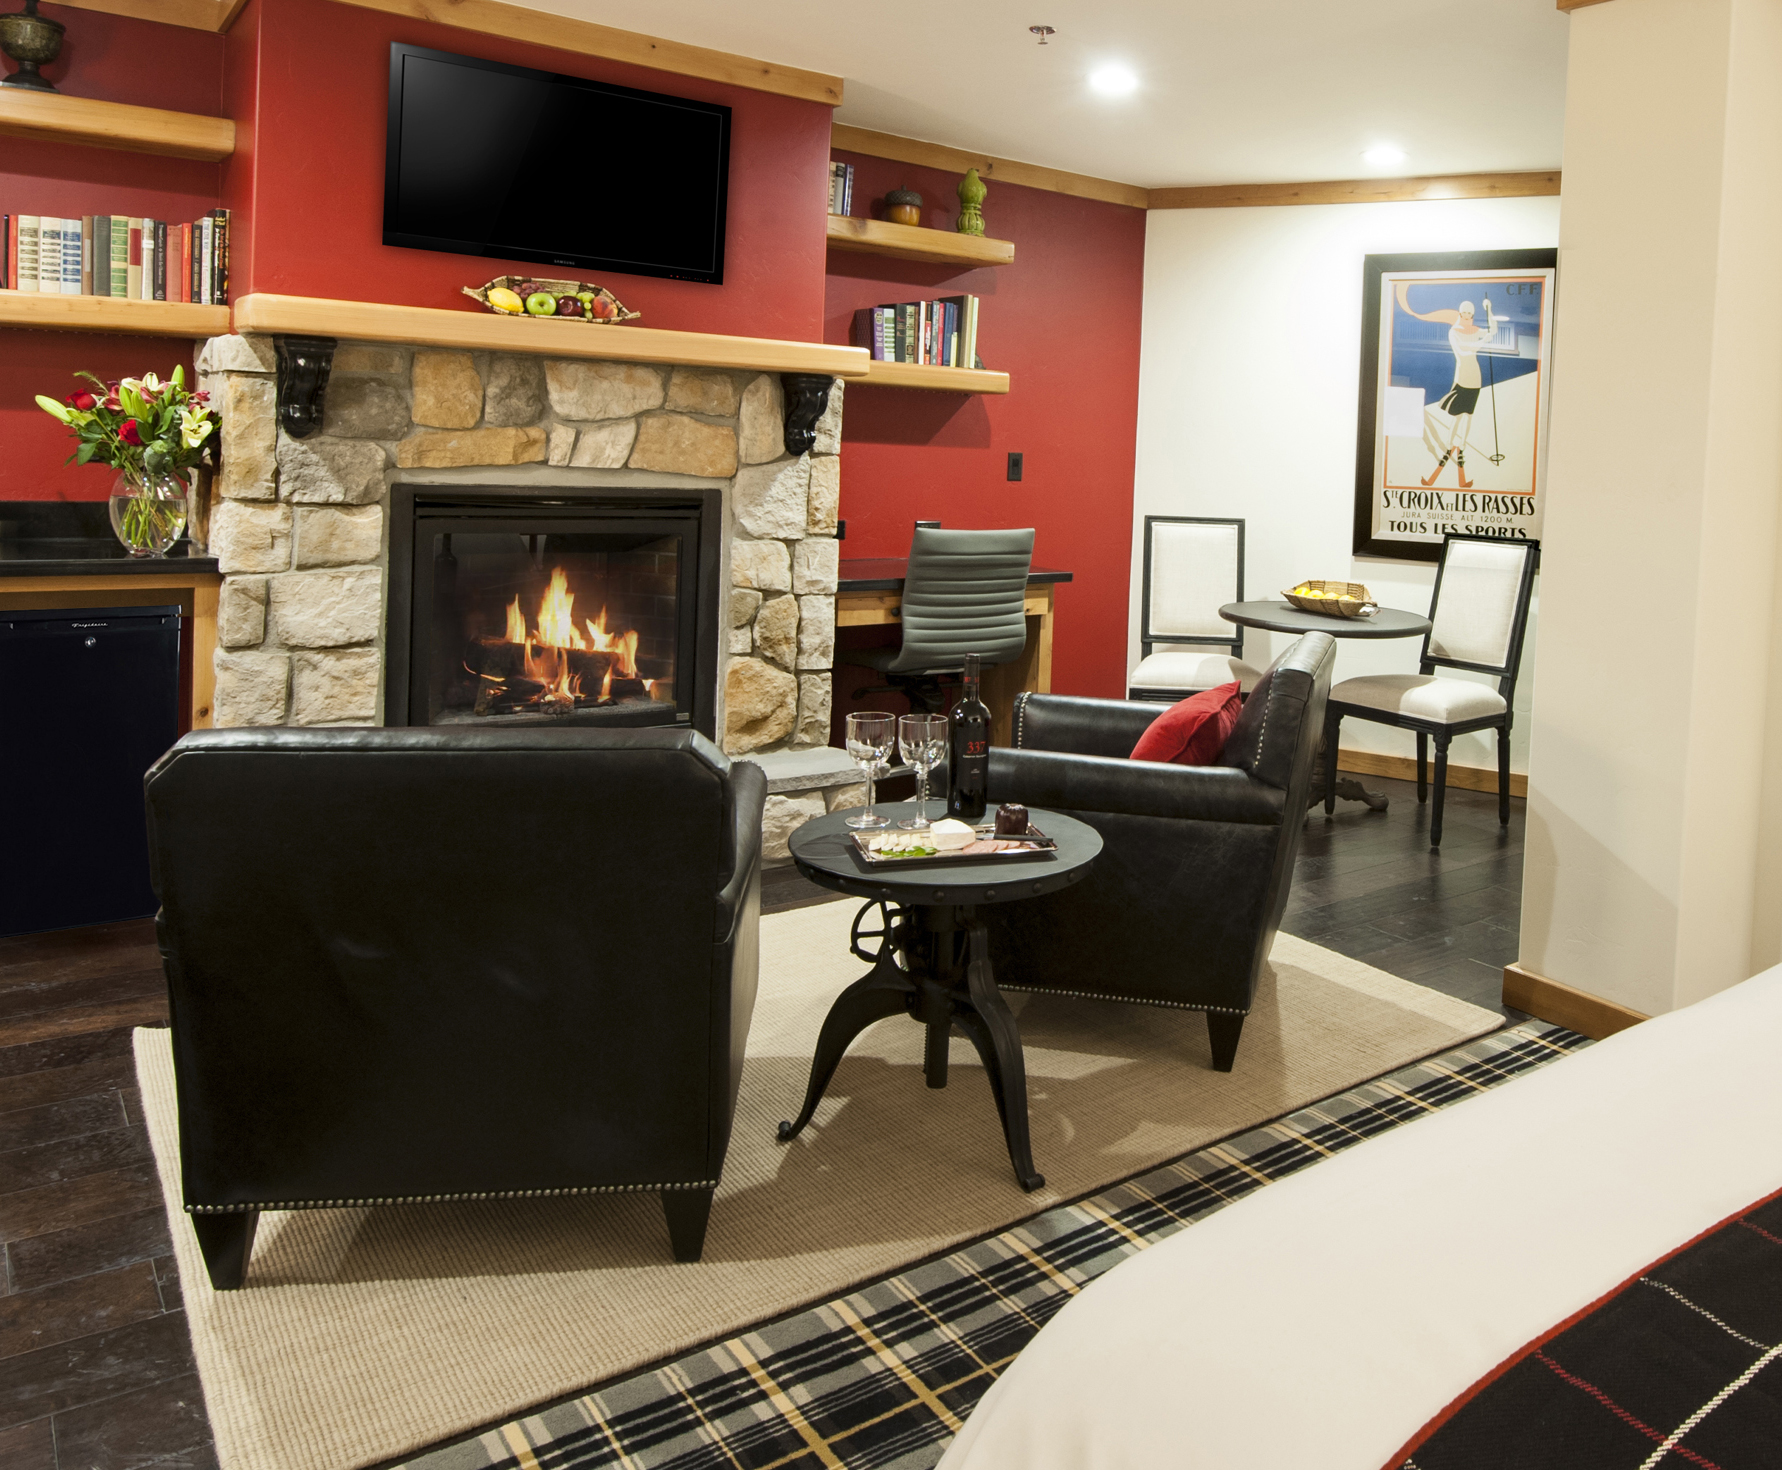 The Soft Landing ski package at The Landing Resort & Spa includes two nights in a Deluxe King Fireplace room © The Landing Resort & Spa